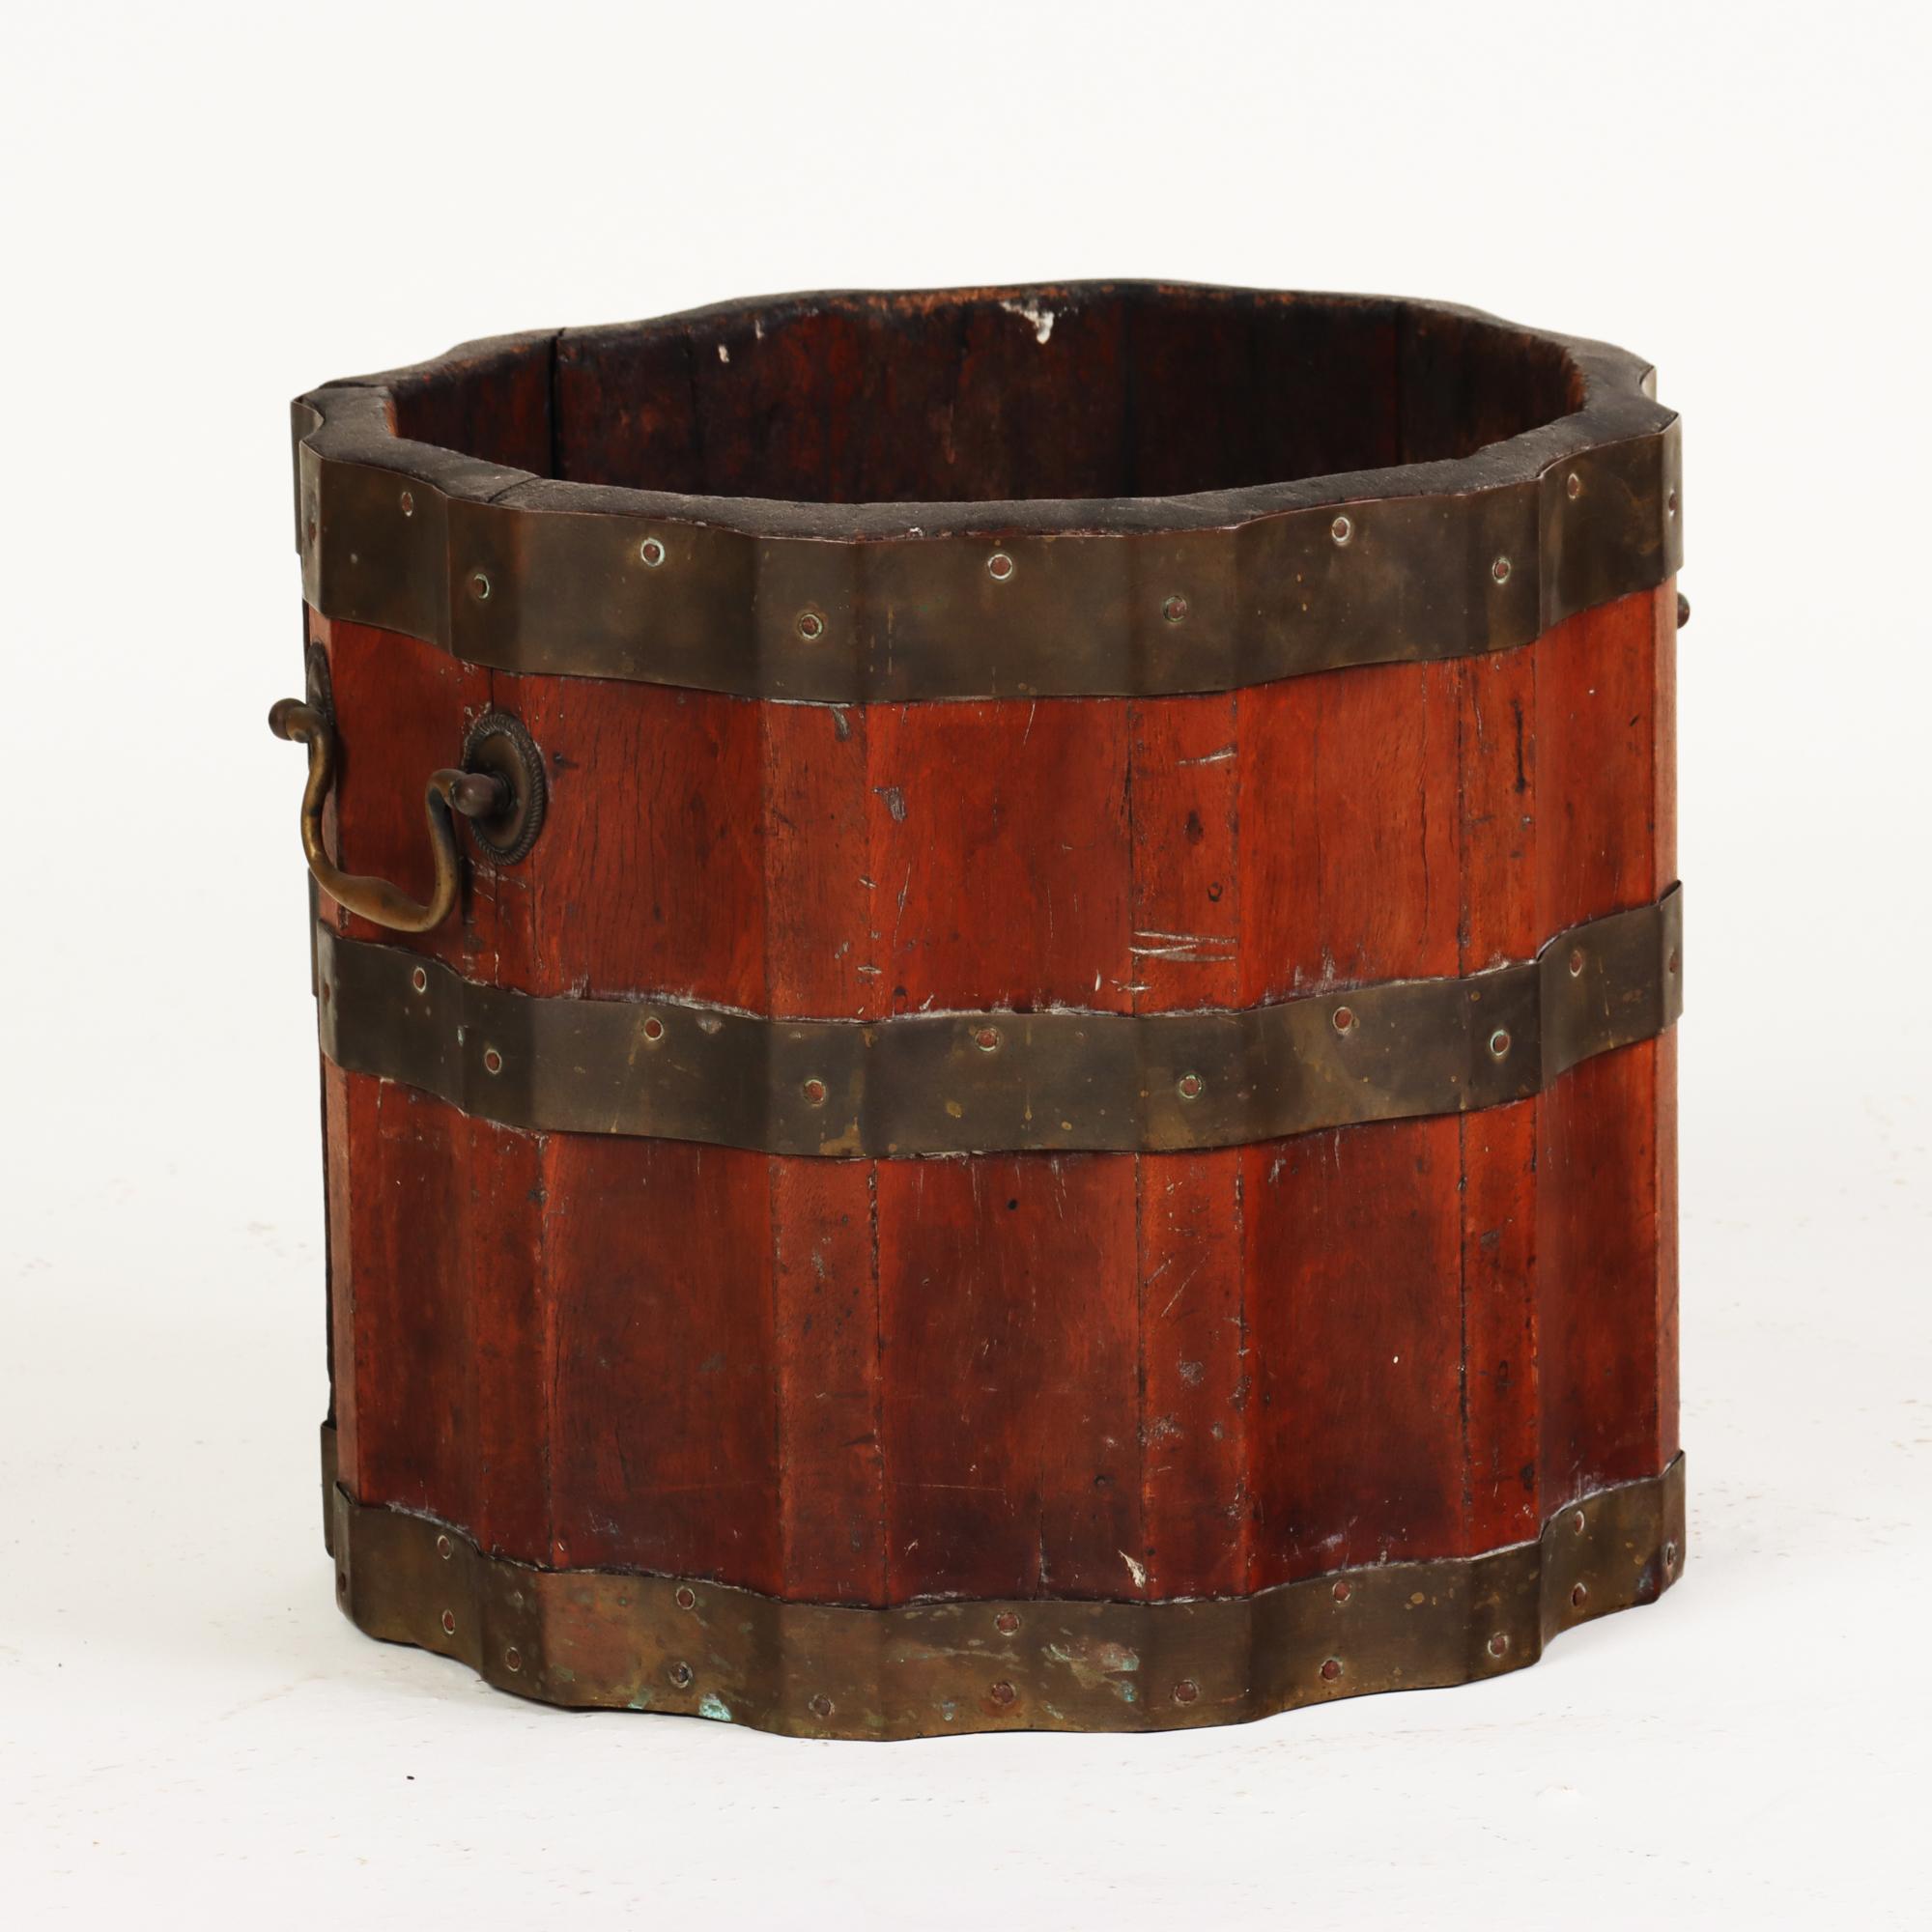 19th Century Fluted Vintage Wine Barrel or Bucket, with Brass Bands and Handles, C 19th C